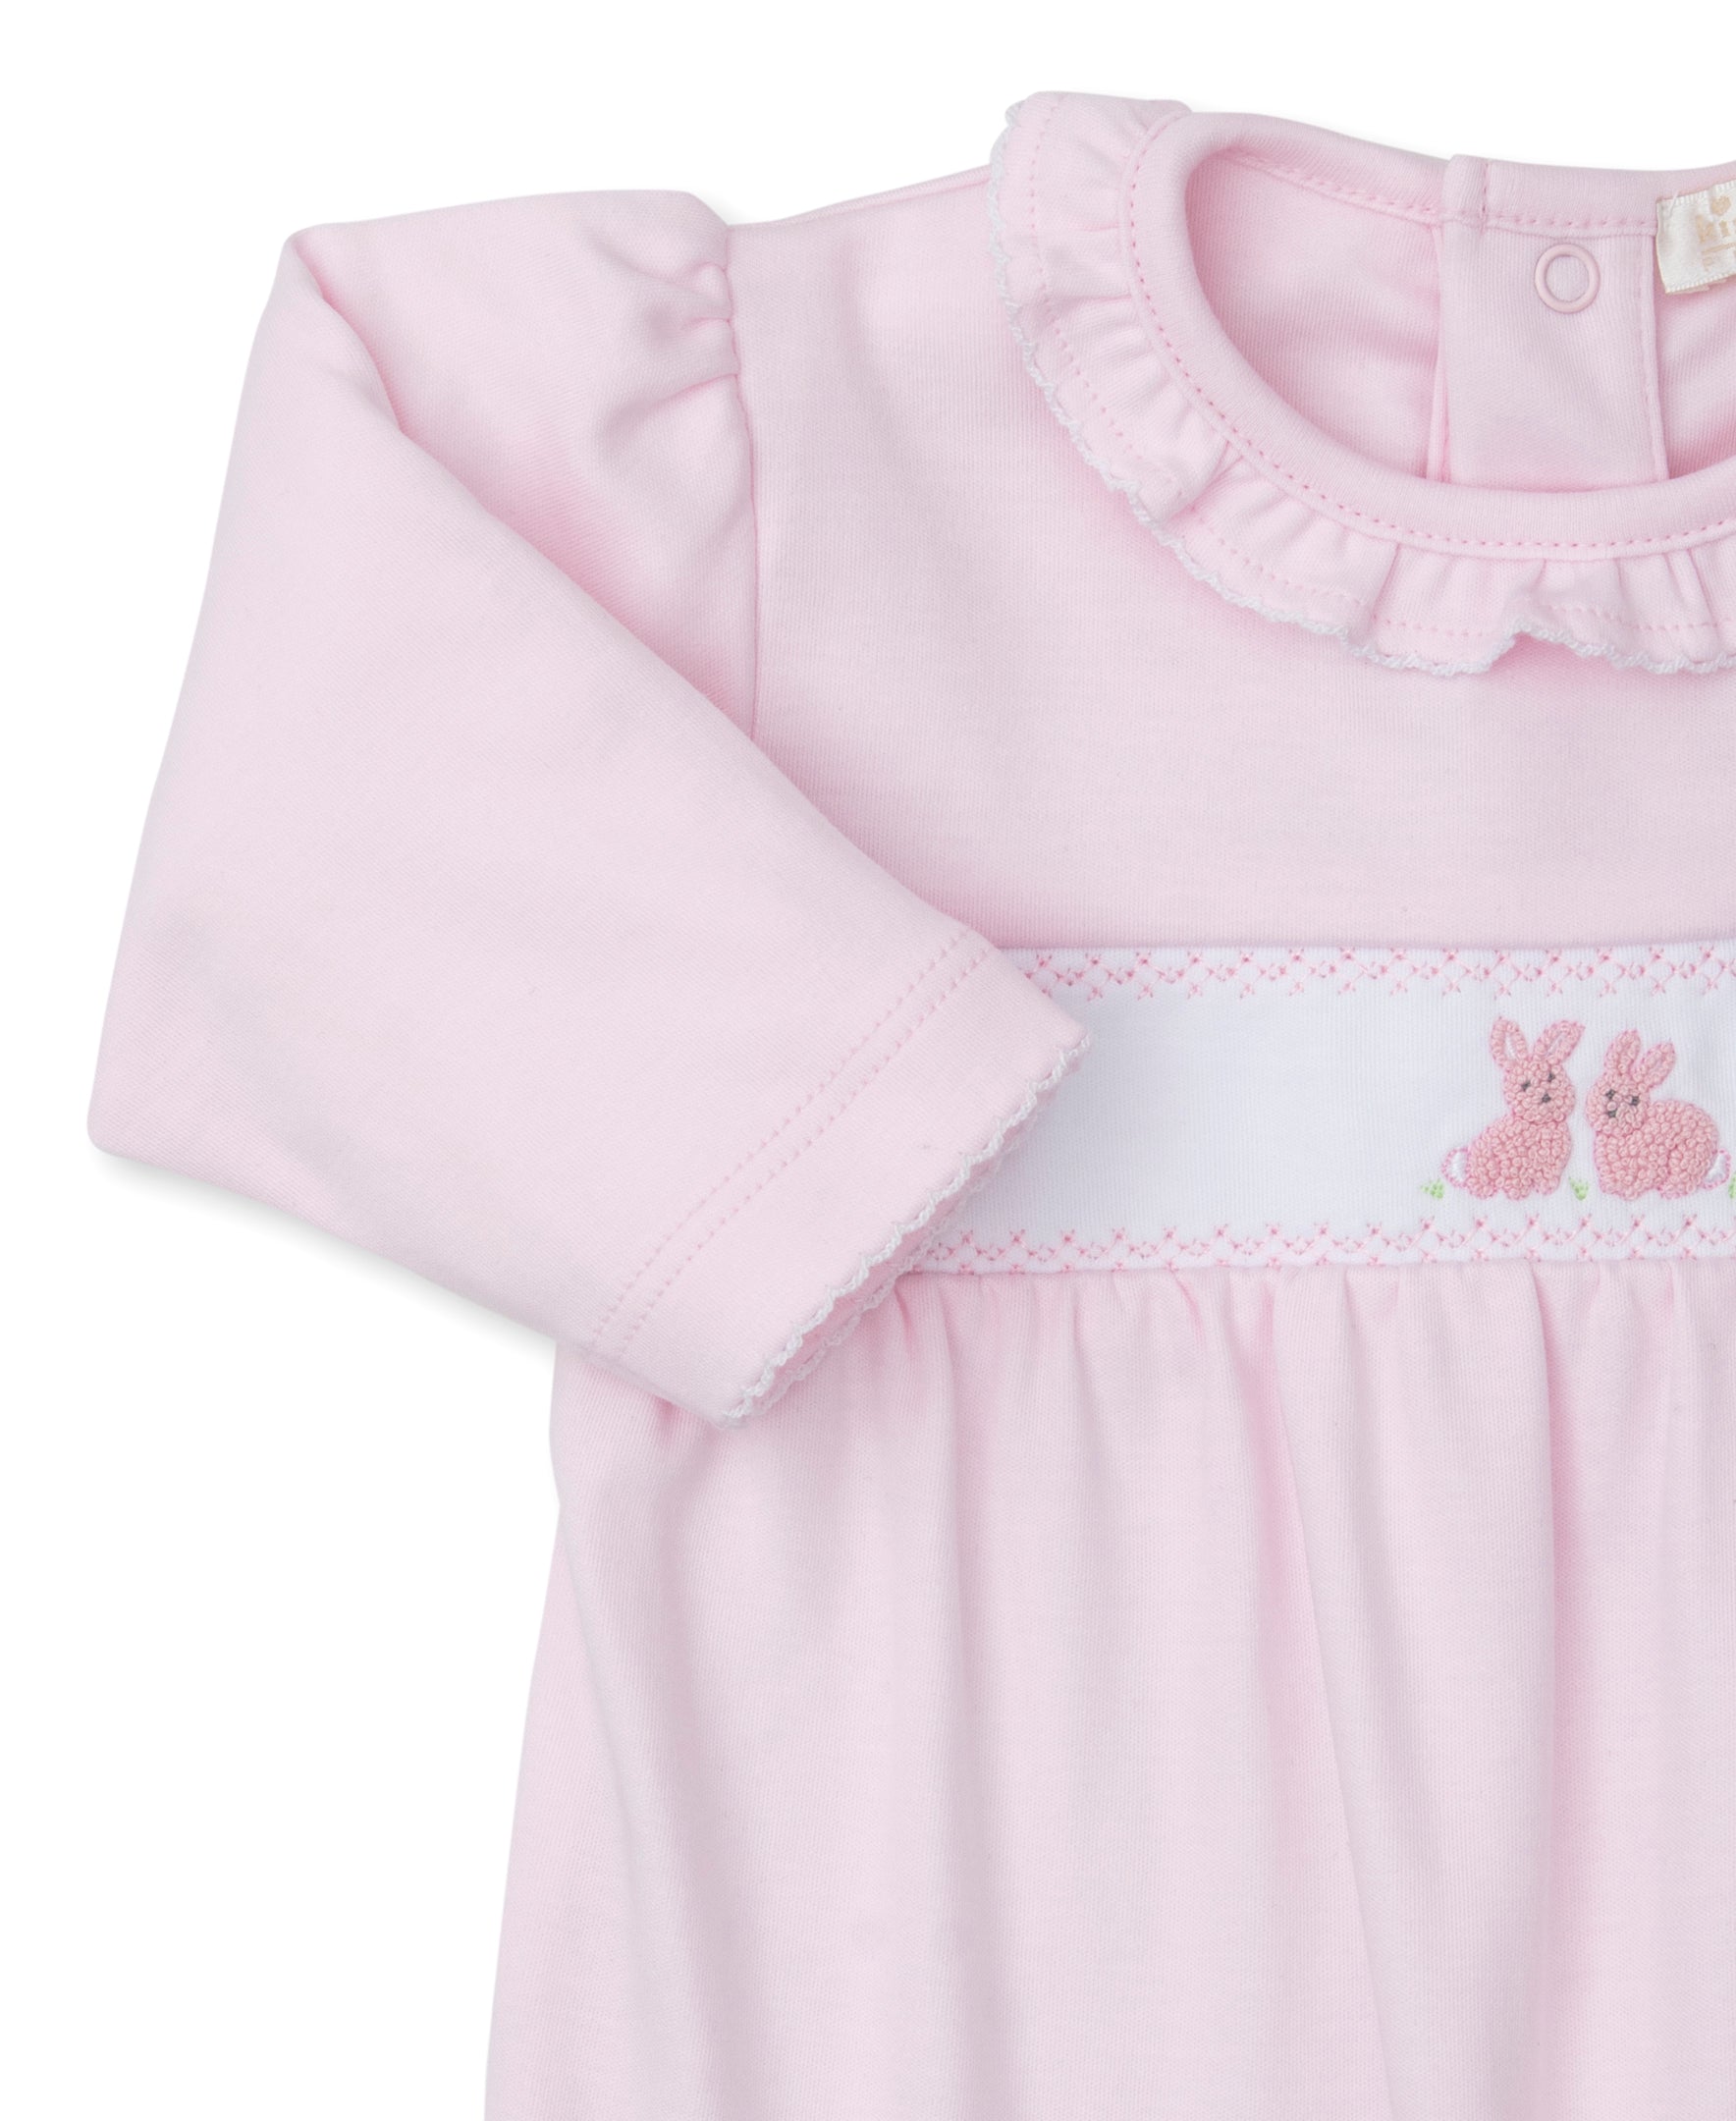 Premier Cottontail Hollows: Pink Footie w/ Hand Embroidered Bunnies